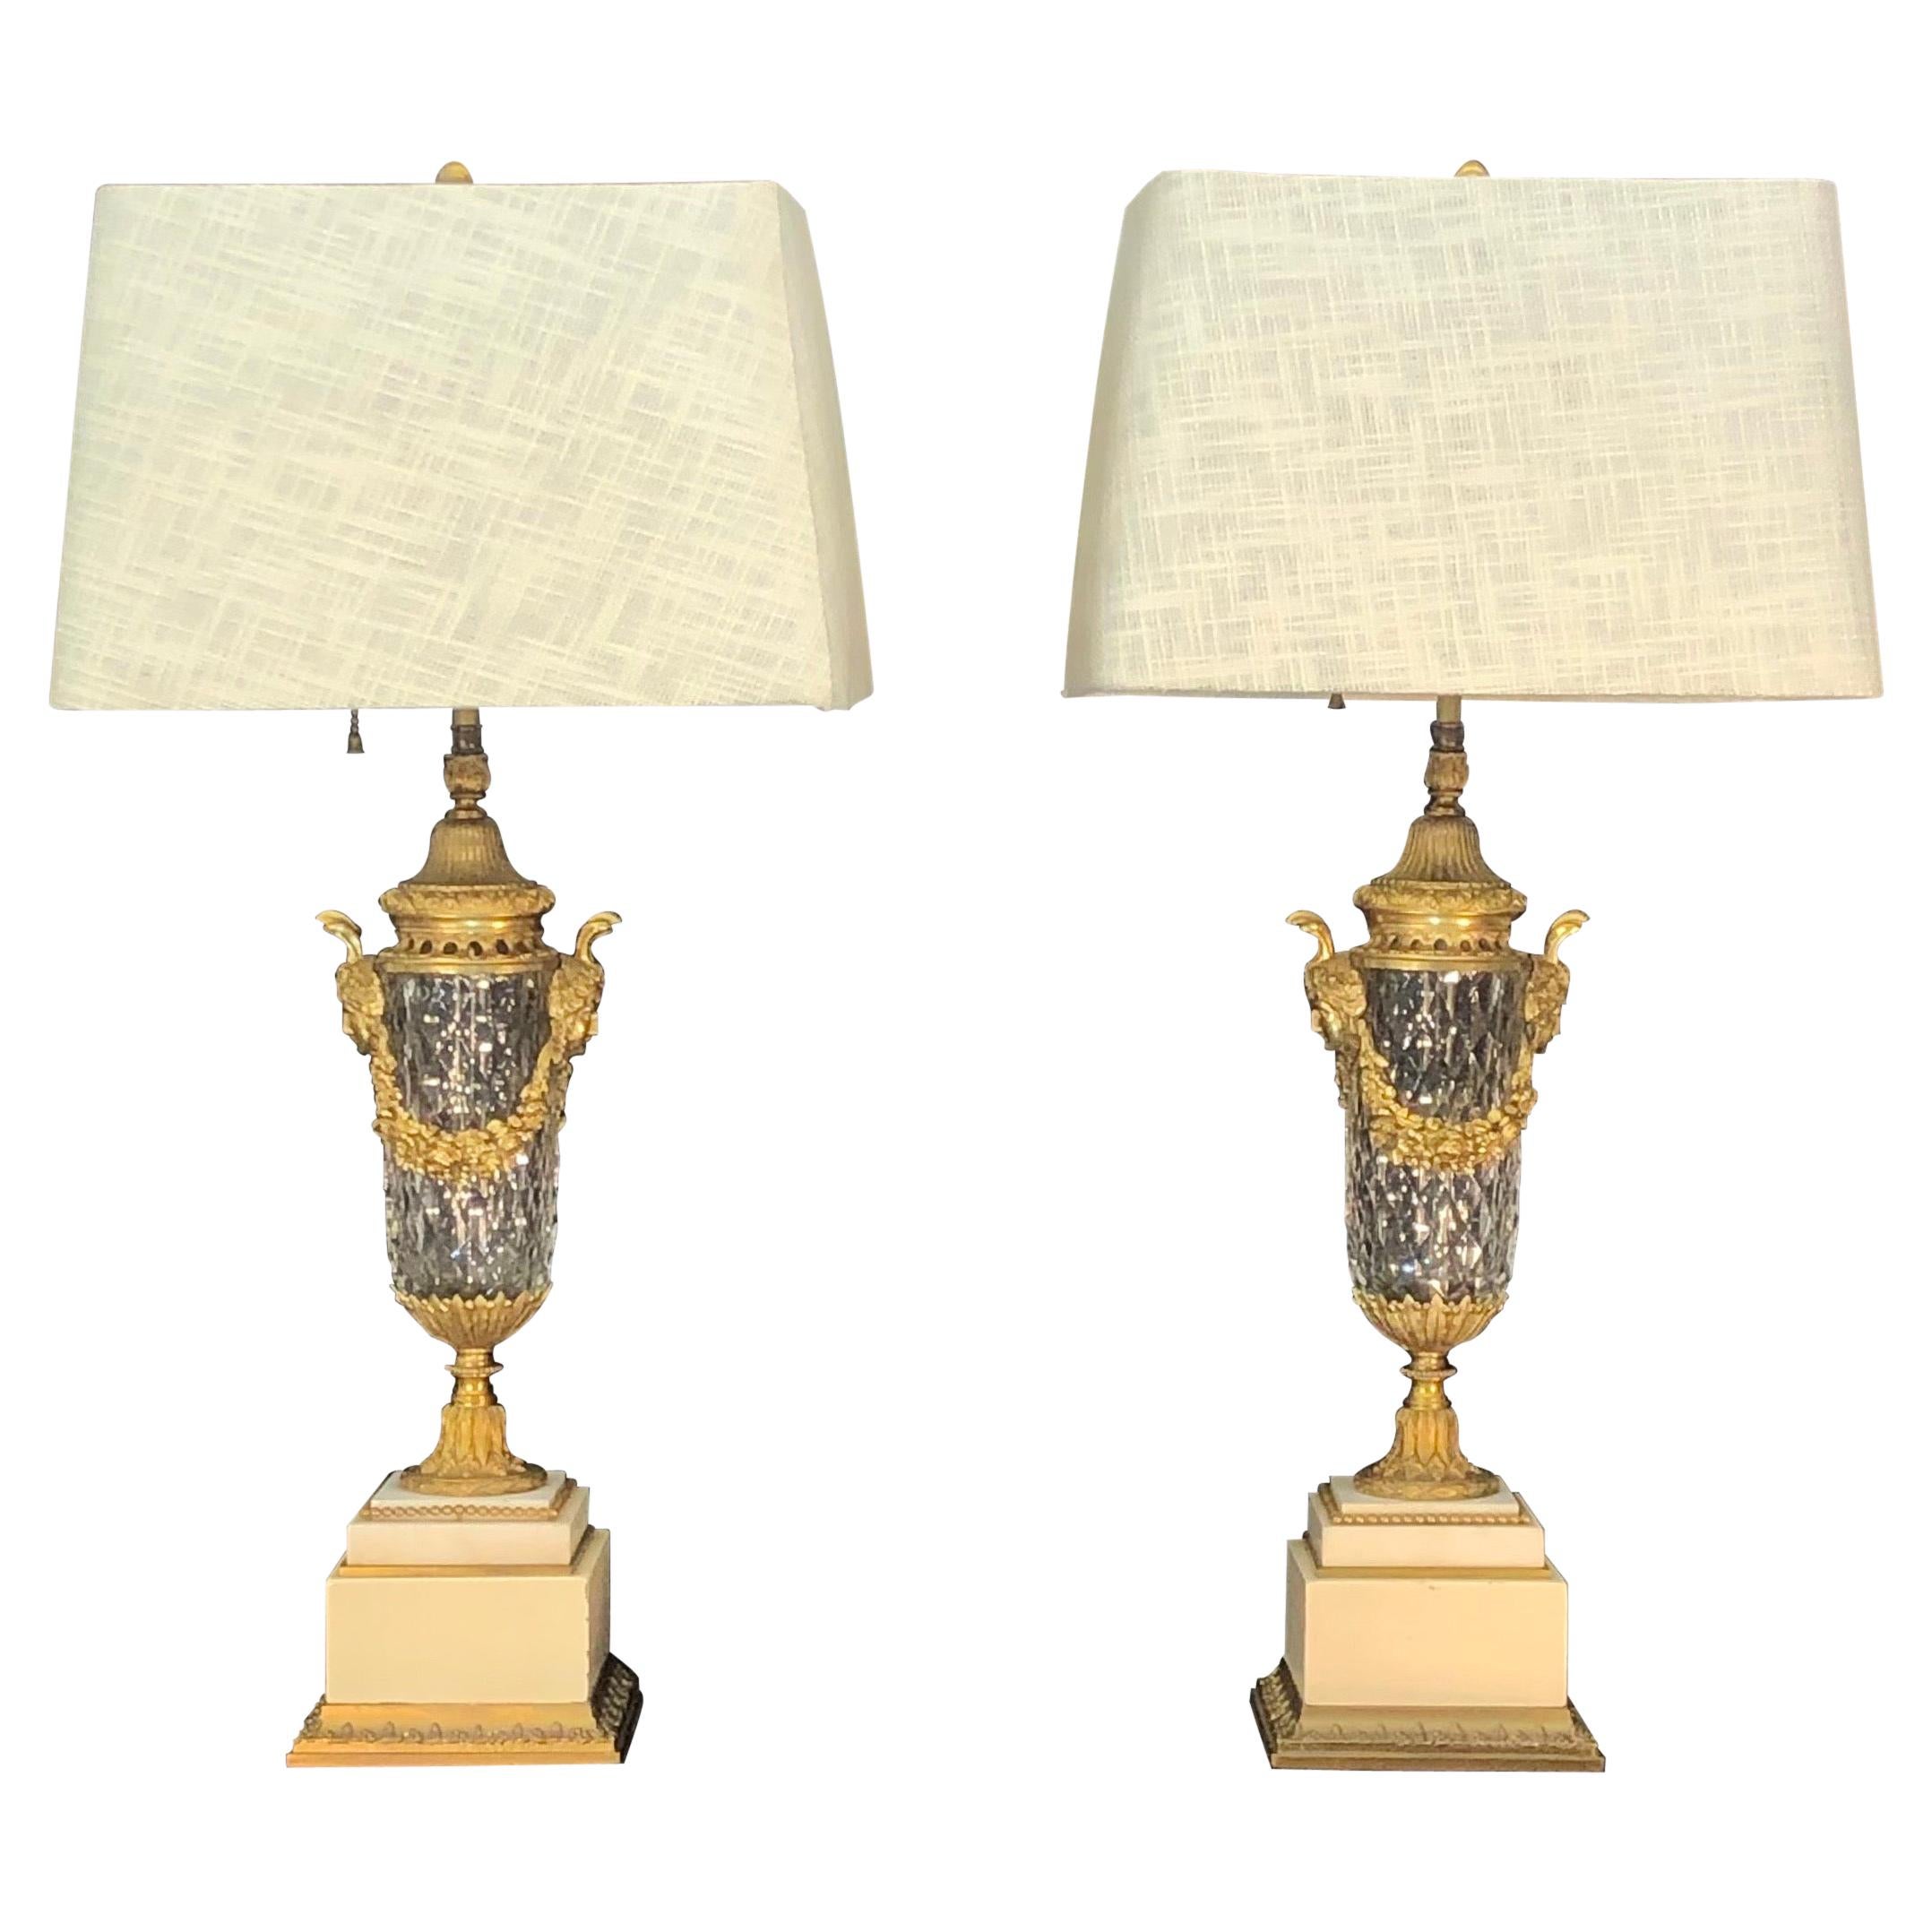 Pair of French Louis XIV Crystal with Bronze Doré Mounted Urns / Lamps, 19th C.